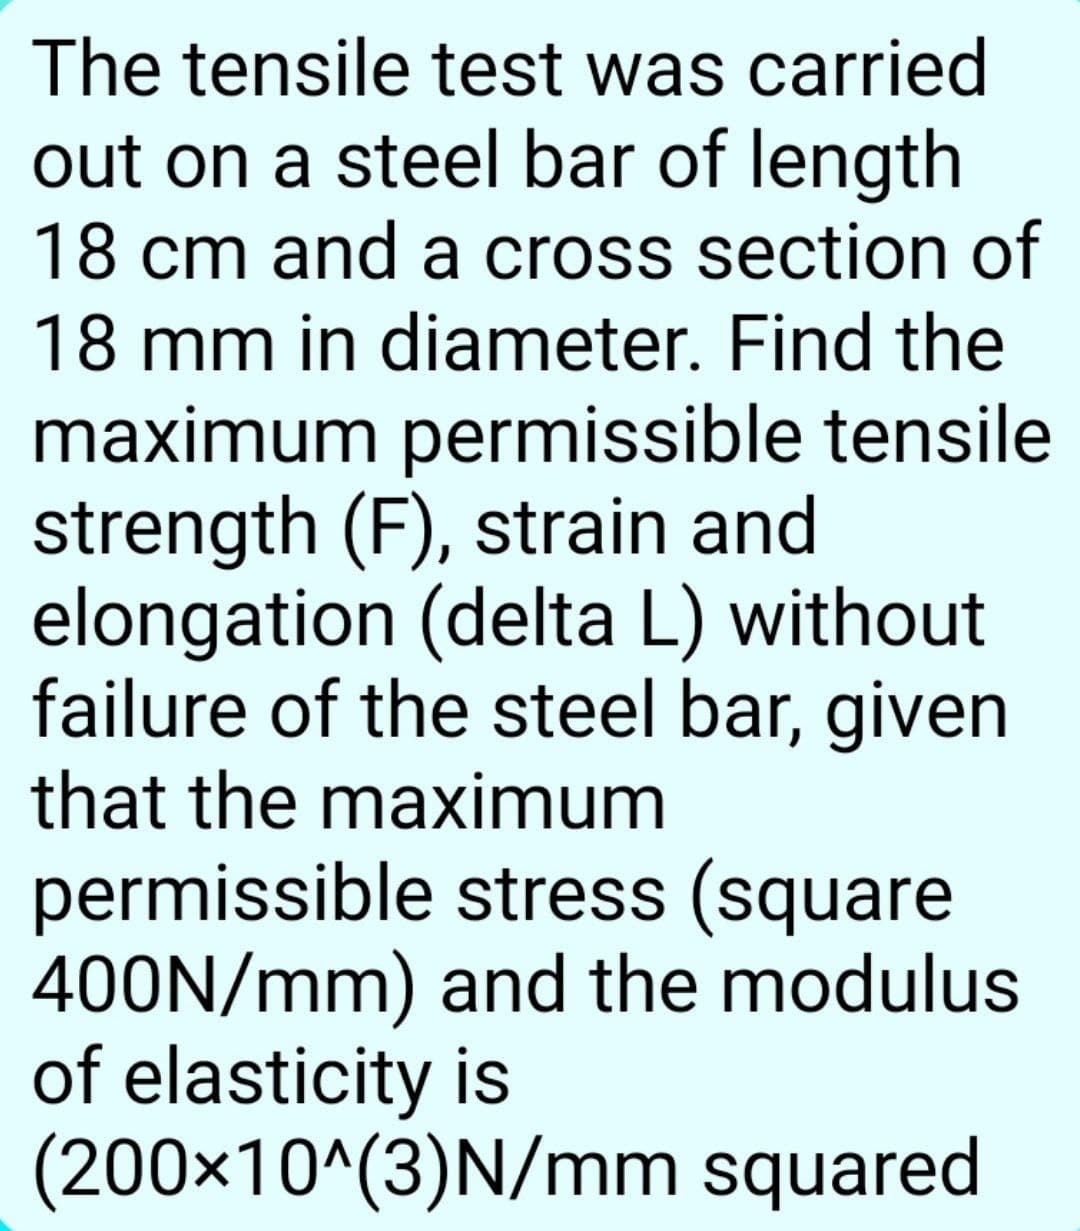 The tensile test was carried
out on a steel bar of length
18 cm and a cross section of
18 mm in diameter. Find the
maximum permissible tensile
strength (F), strain and
elongation (delta L) without
failure of the steel bar, given
that the maximum
permissible stress (square
400N/mm) and the modulus
of elasticity is
(200×10^(3)N/mm squared
